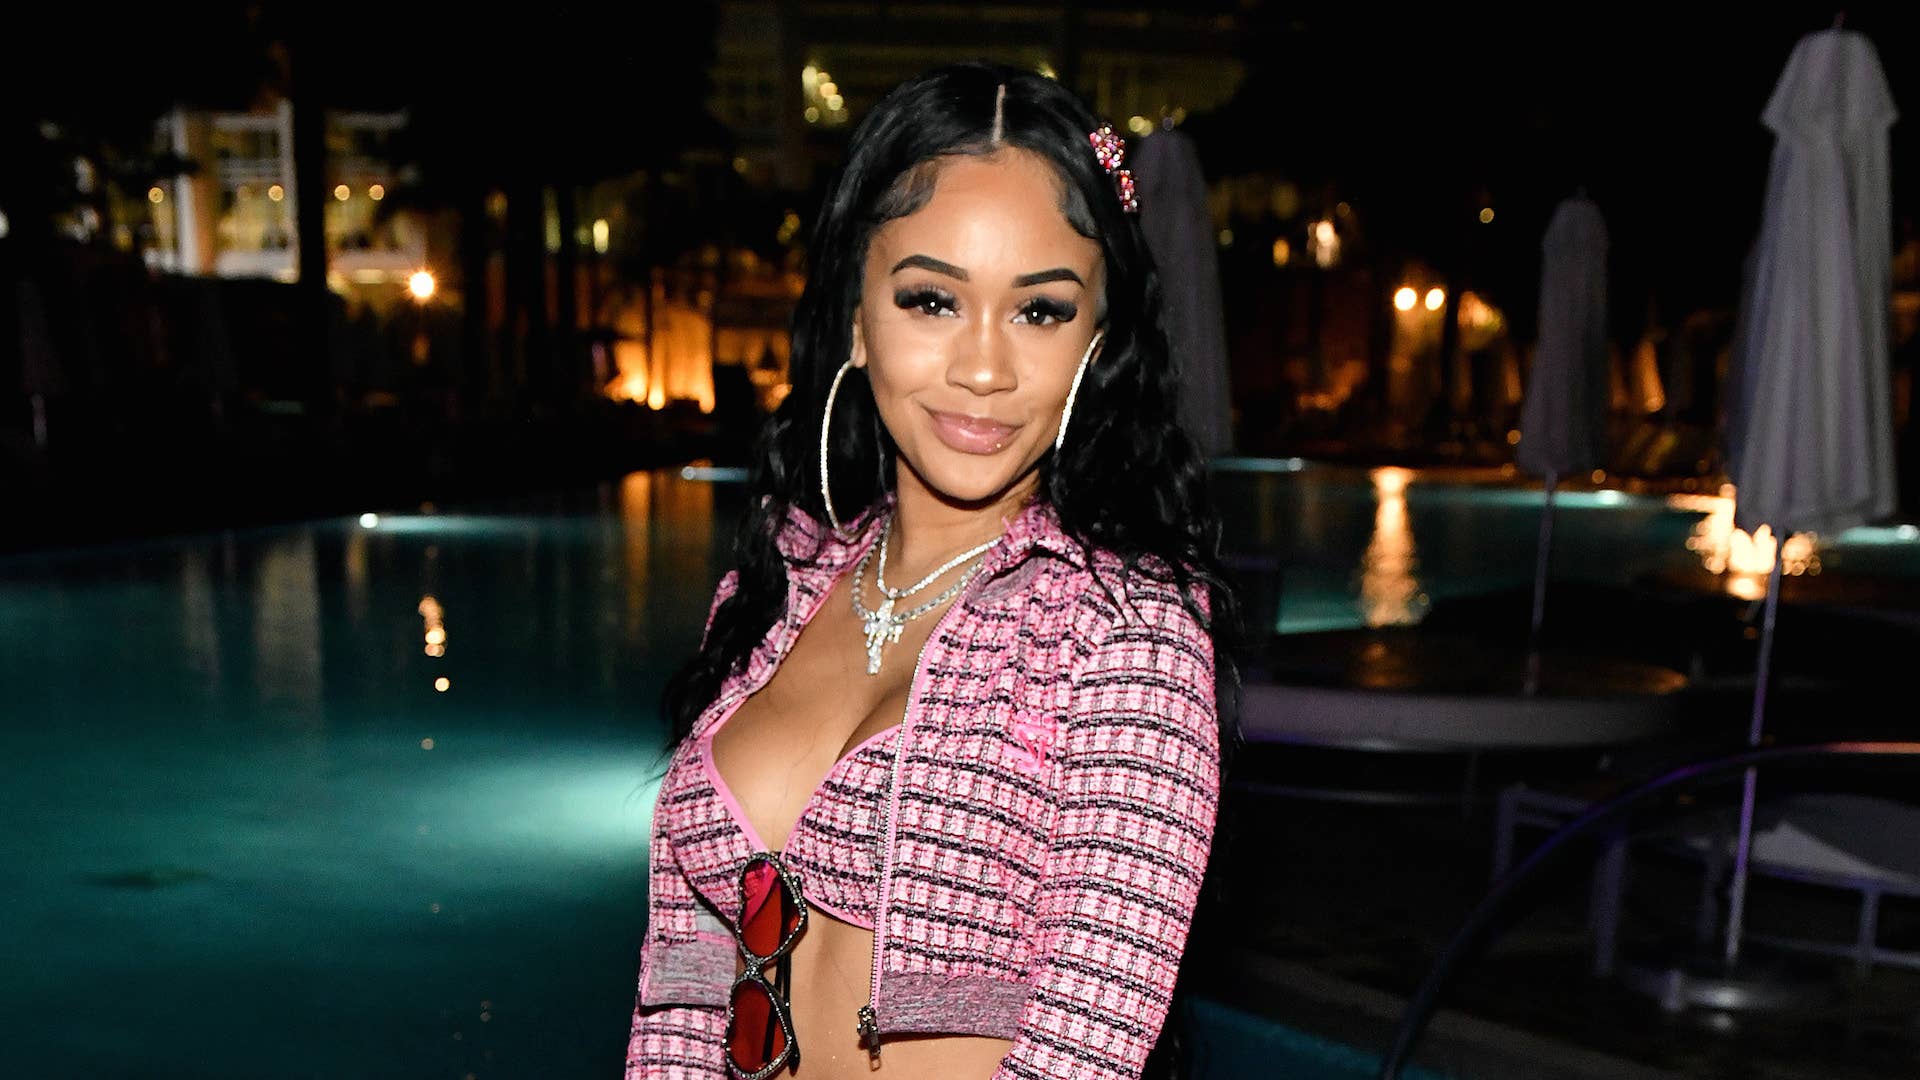 Saweetie at Casamigos Presents Sports Illustrated "The Party”